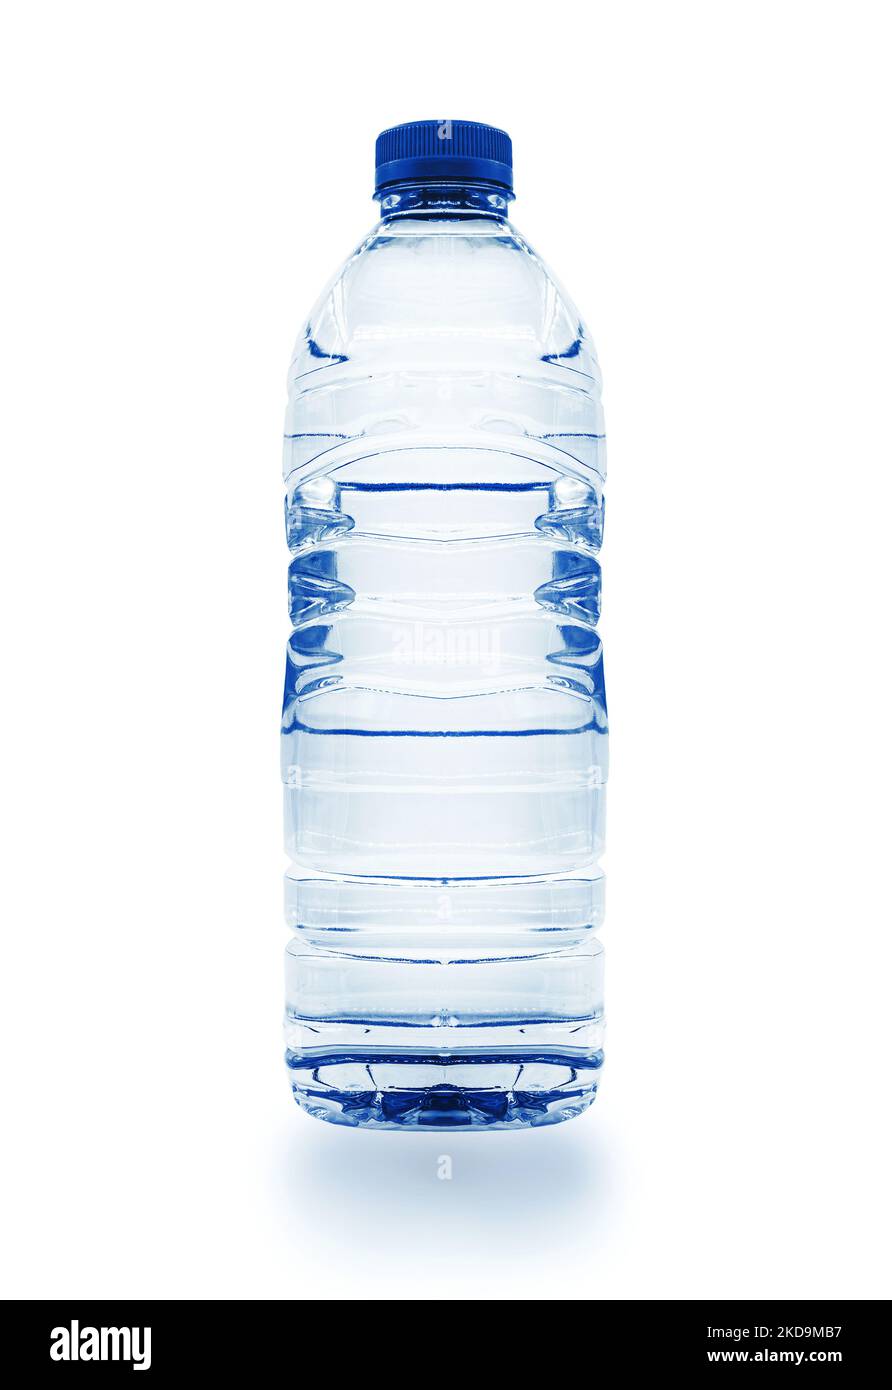 Bottled Water in Six Sizes Stock Photo by ©ginosphotos1 15818829